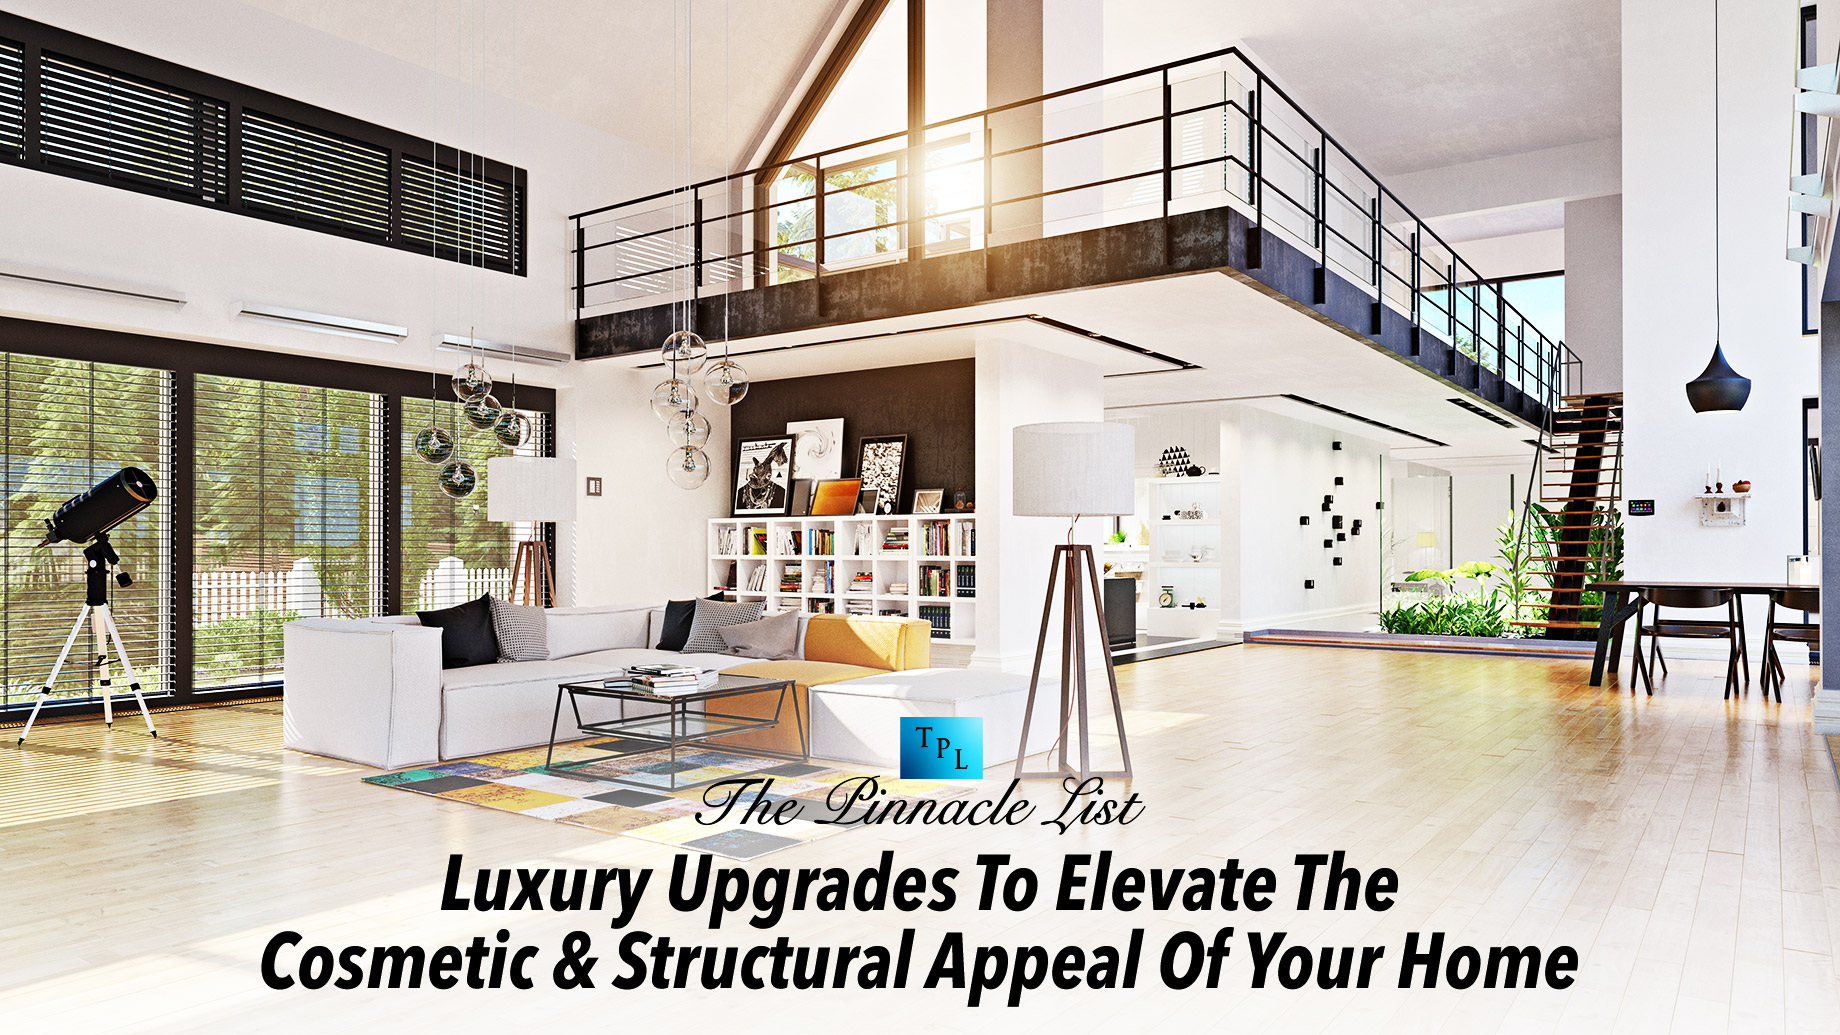 Luxury Upgrades To Elevate The Cosmetic & Structural Appeal Of Your Home